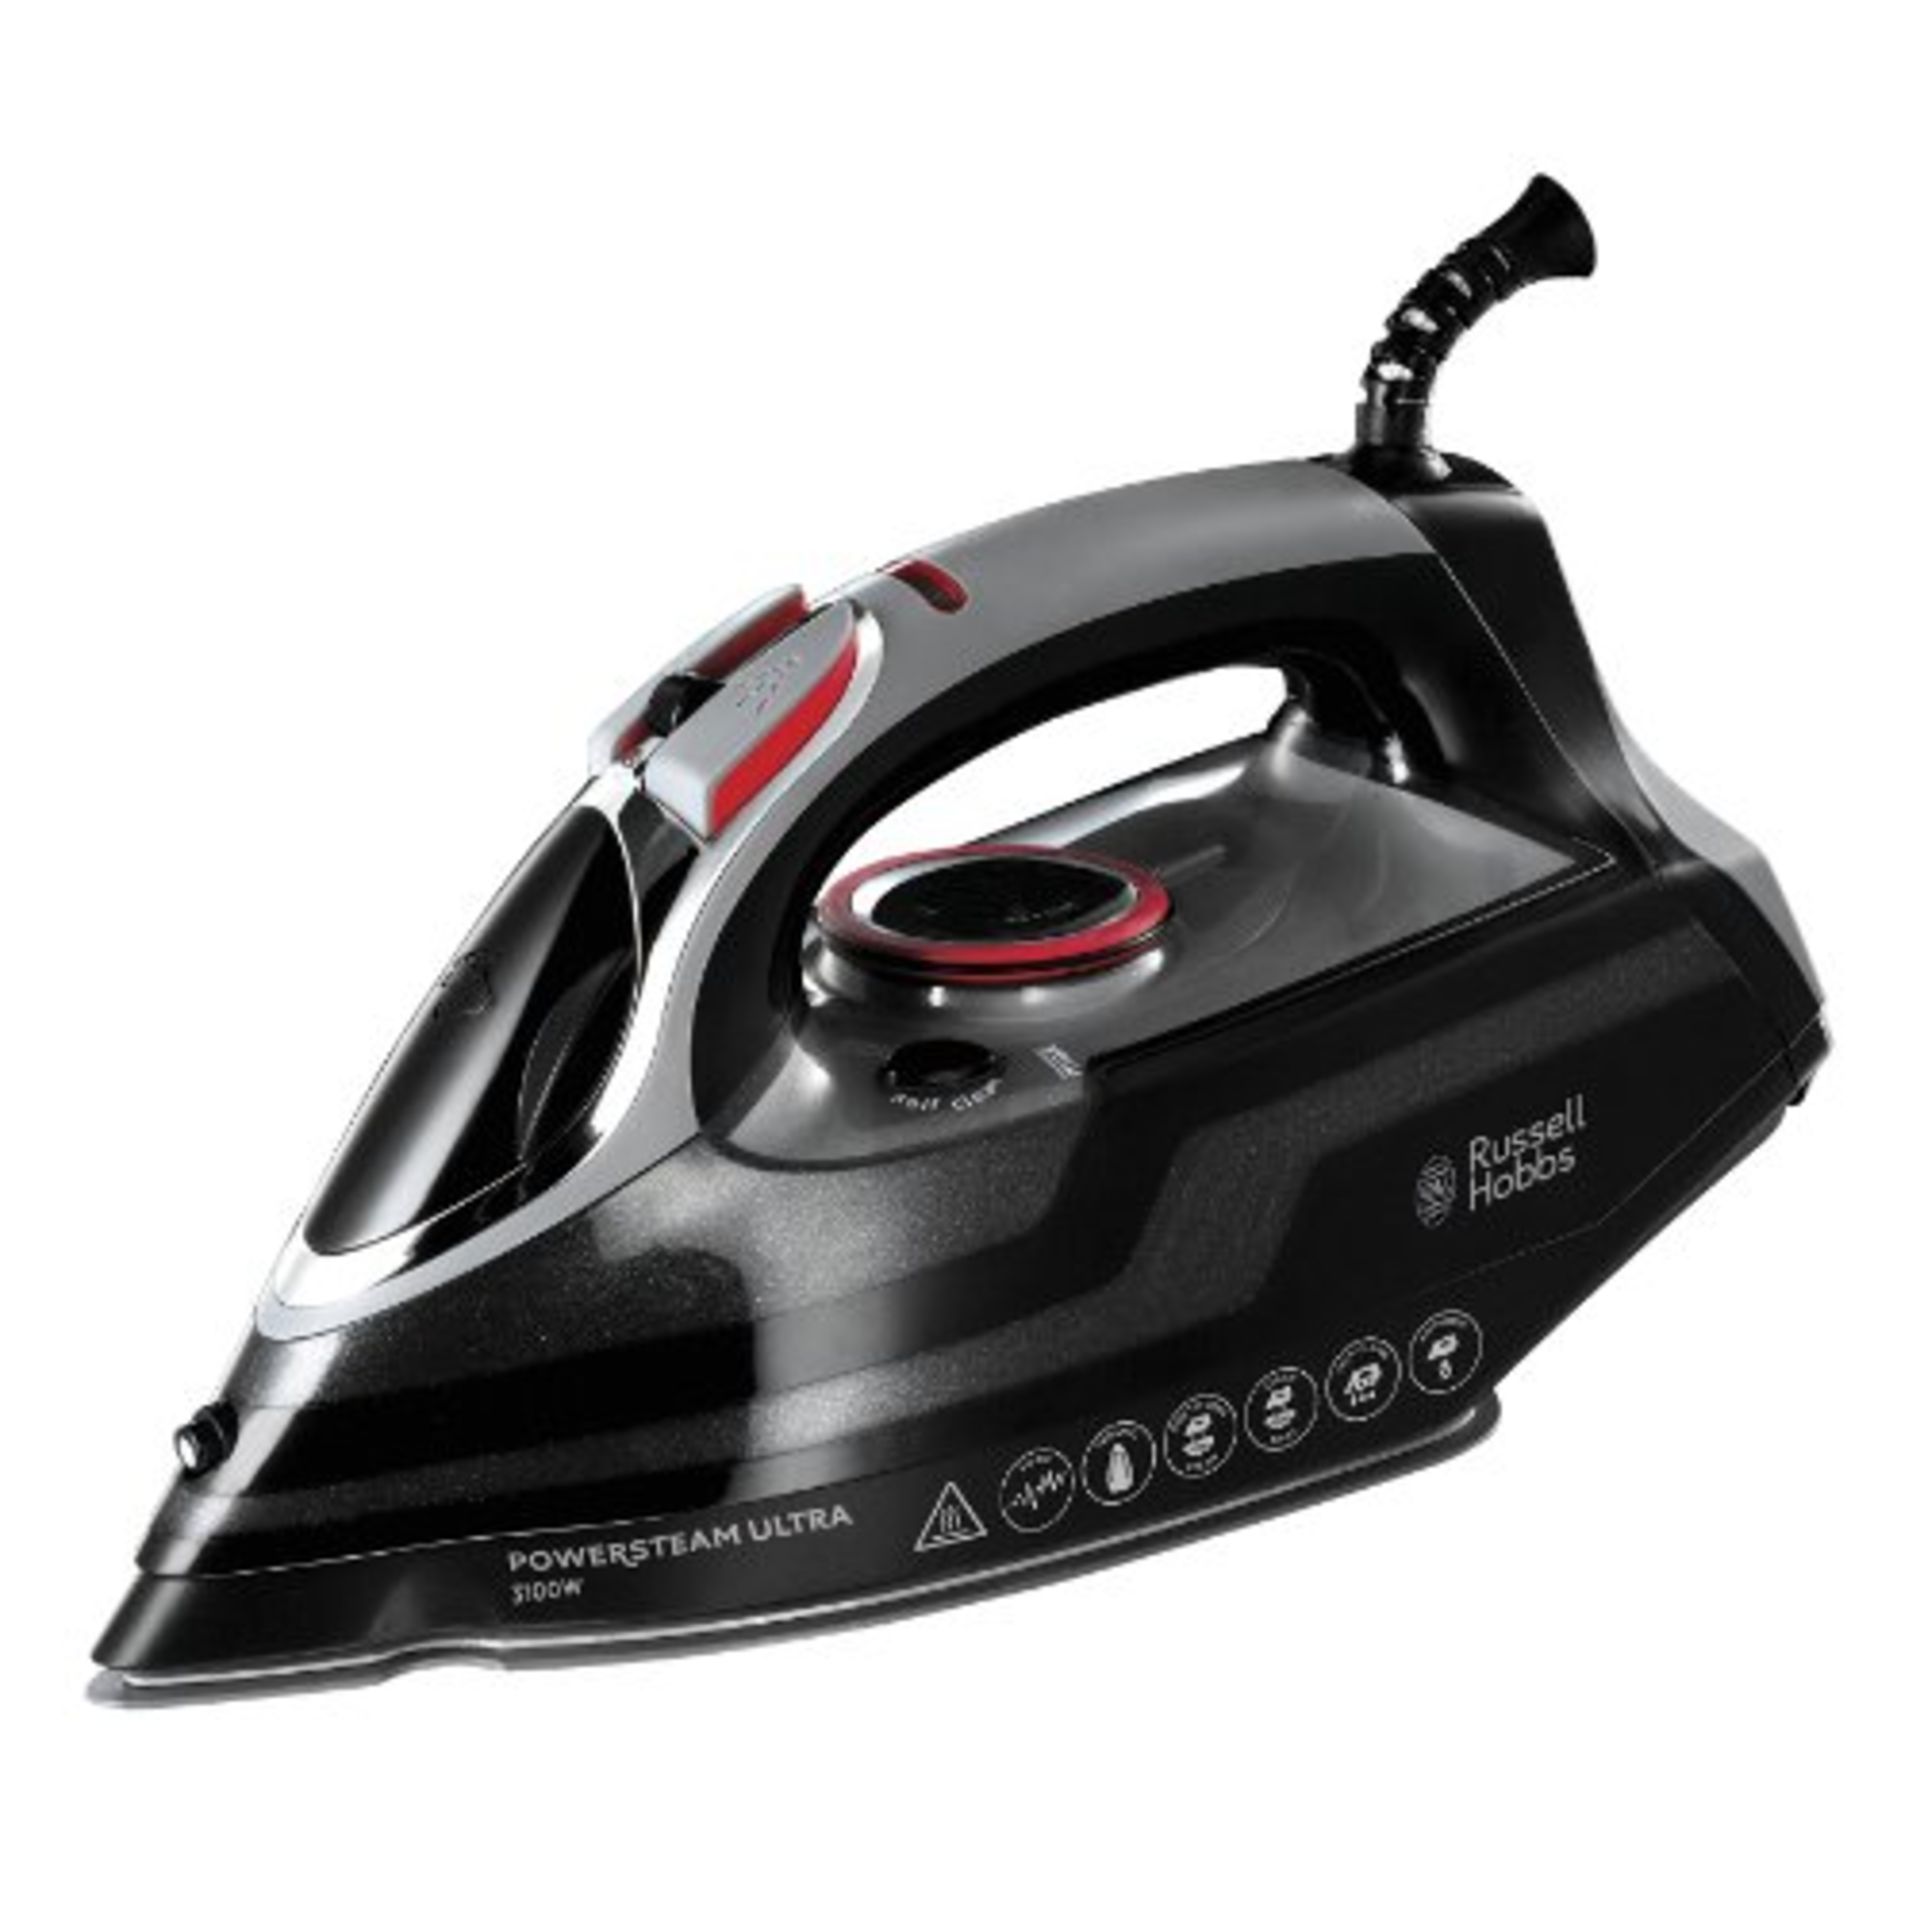 Russell Hobbs Powersteam Ultra 3100 W Vertical Steam Iron 20630 - Black and Grey - Image 10 of 15